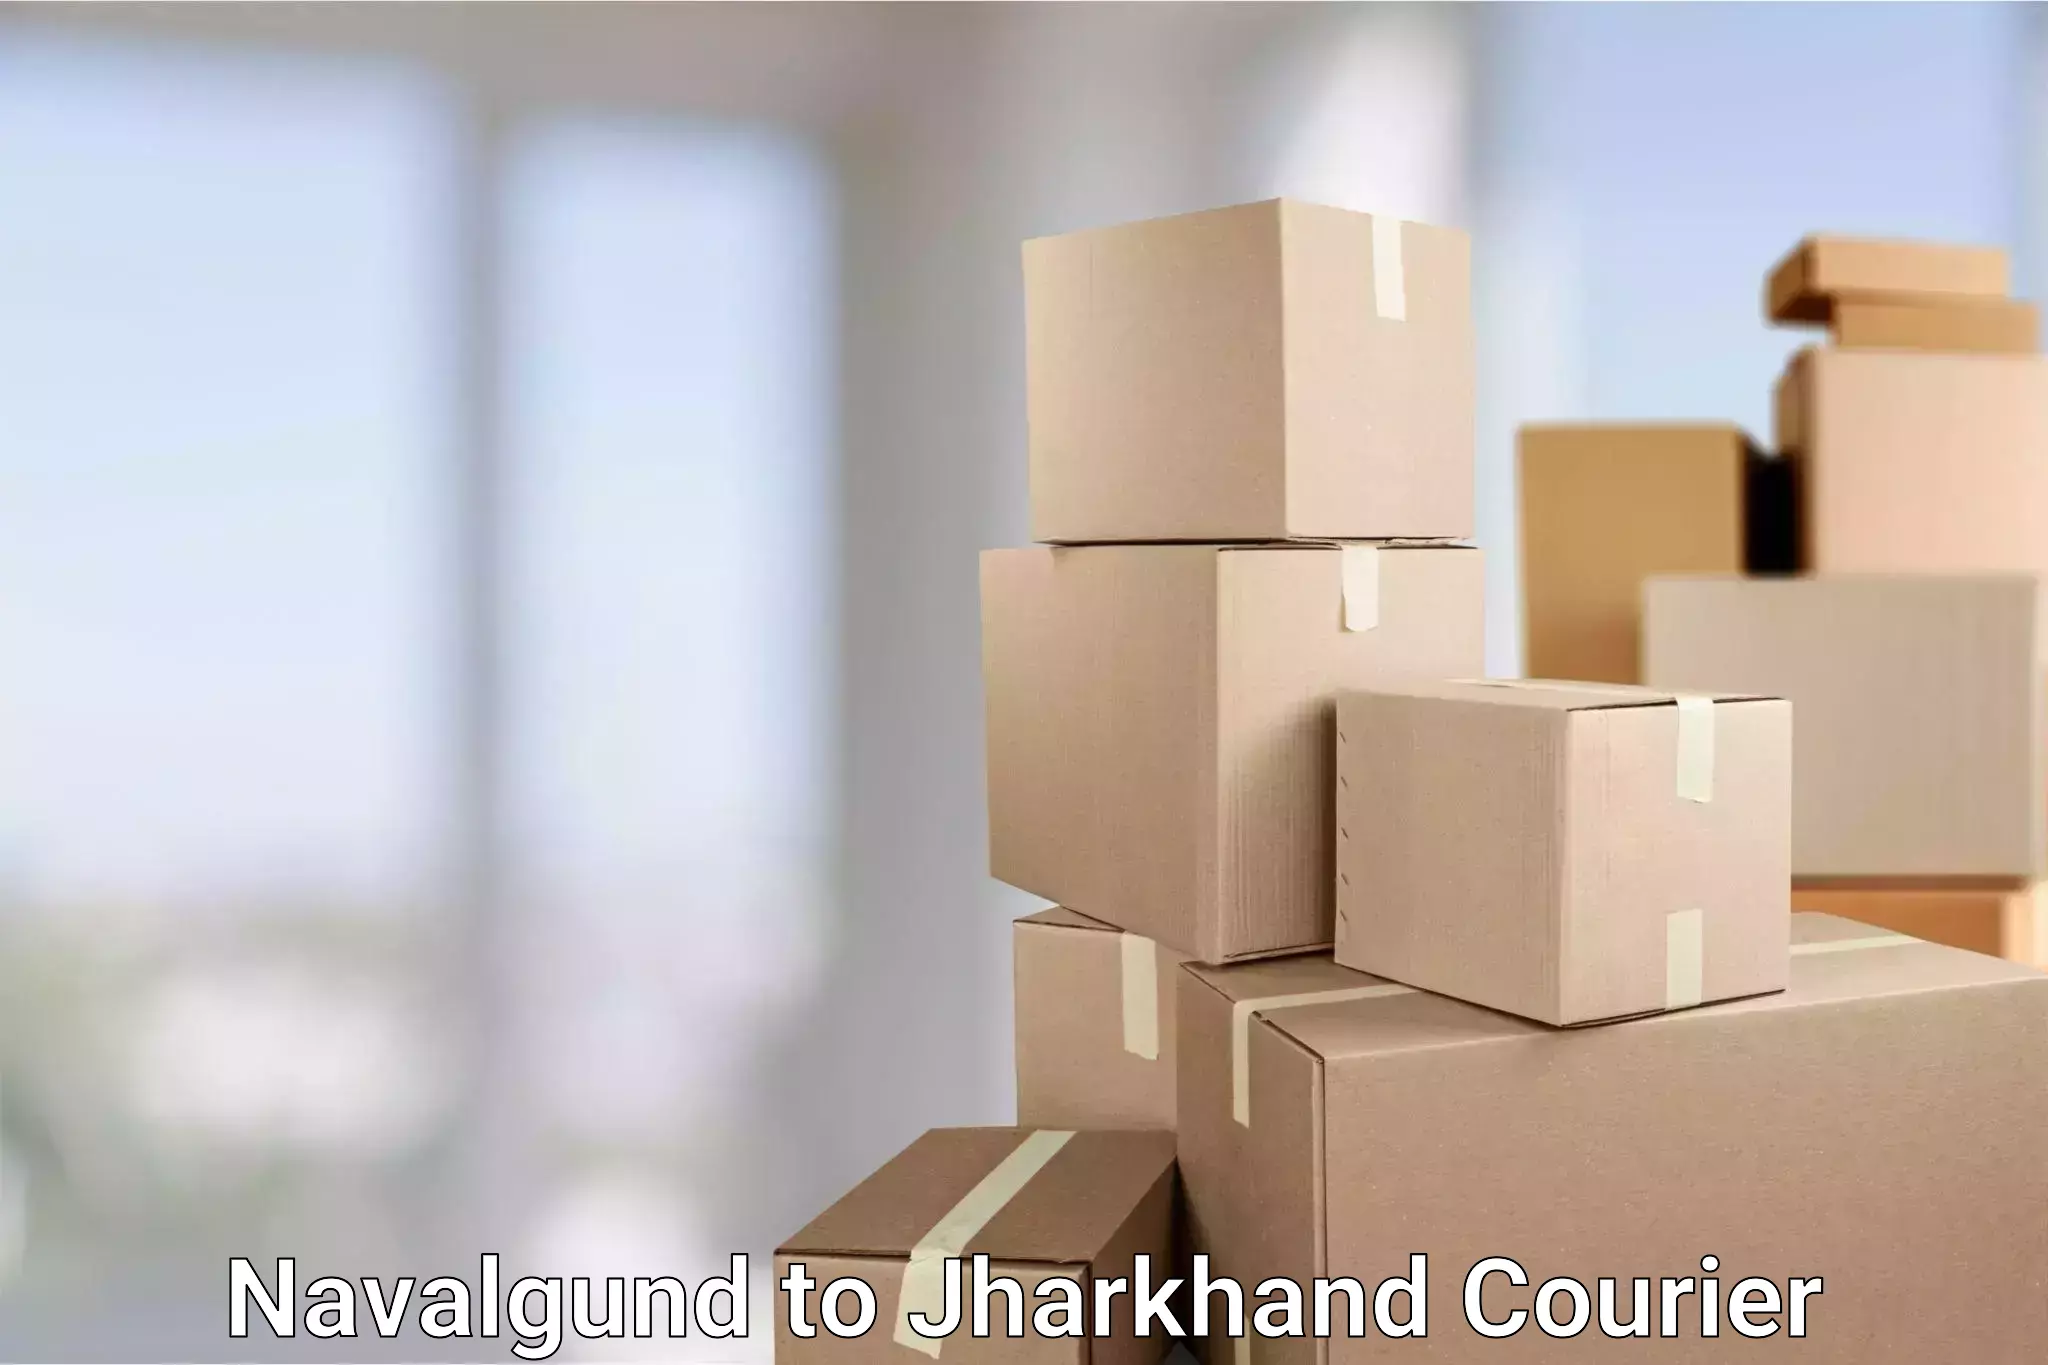 Automated parcel services Navalgund to Jharkhand